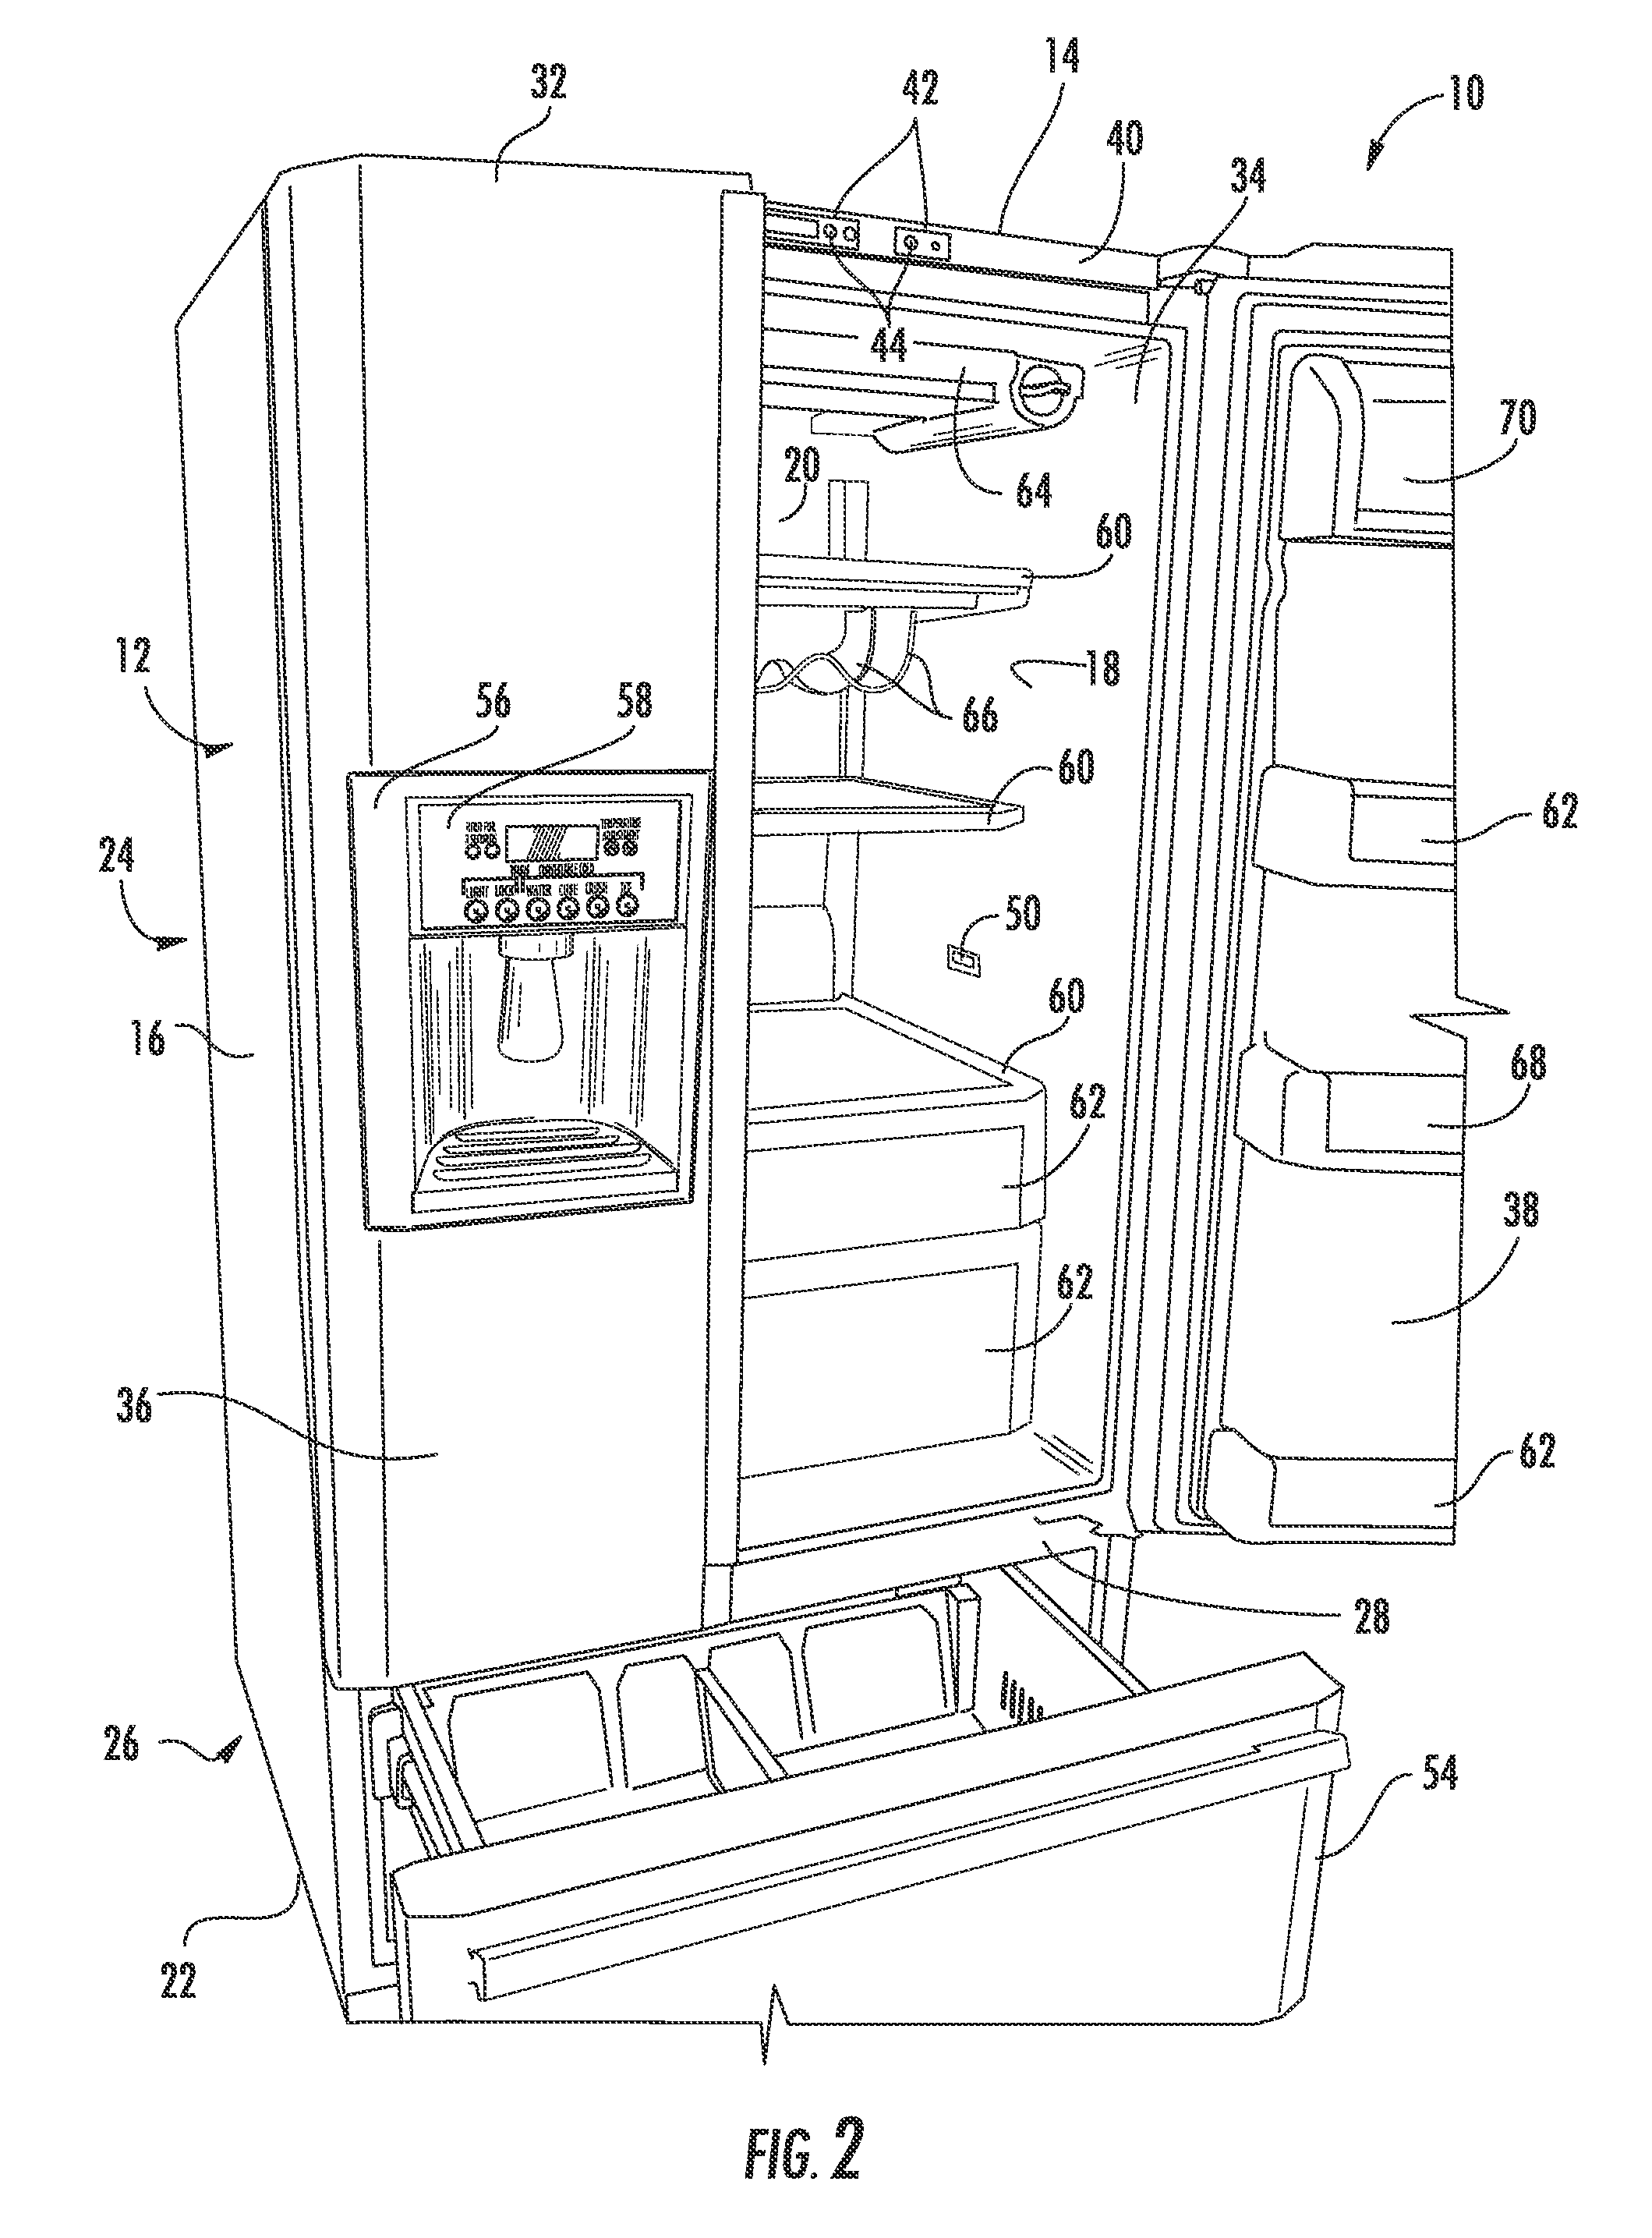 Refrigerator having compartment capable of converting between refrigeration and freezing temperatures